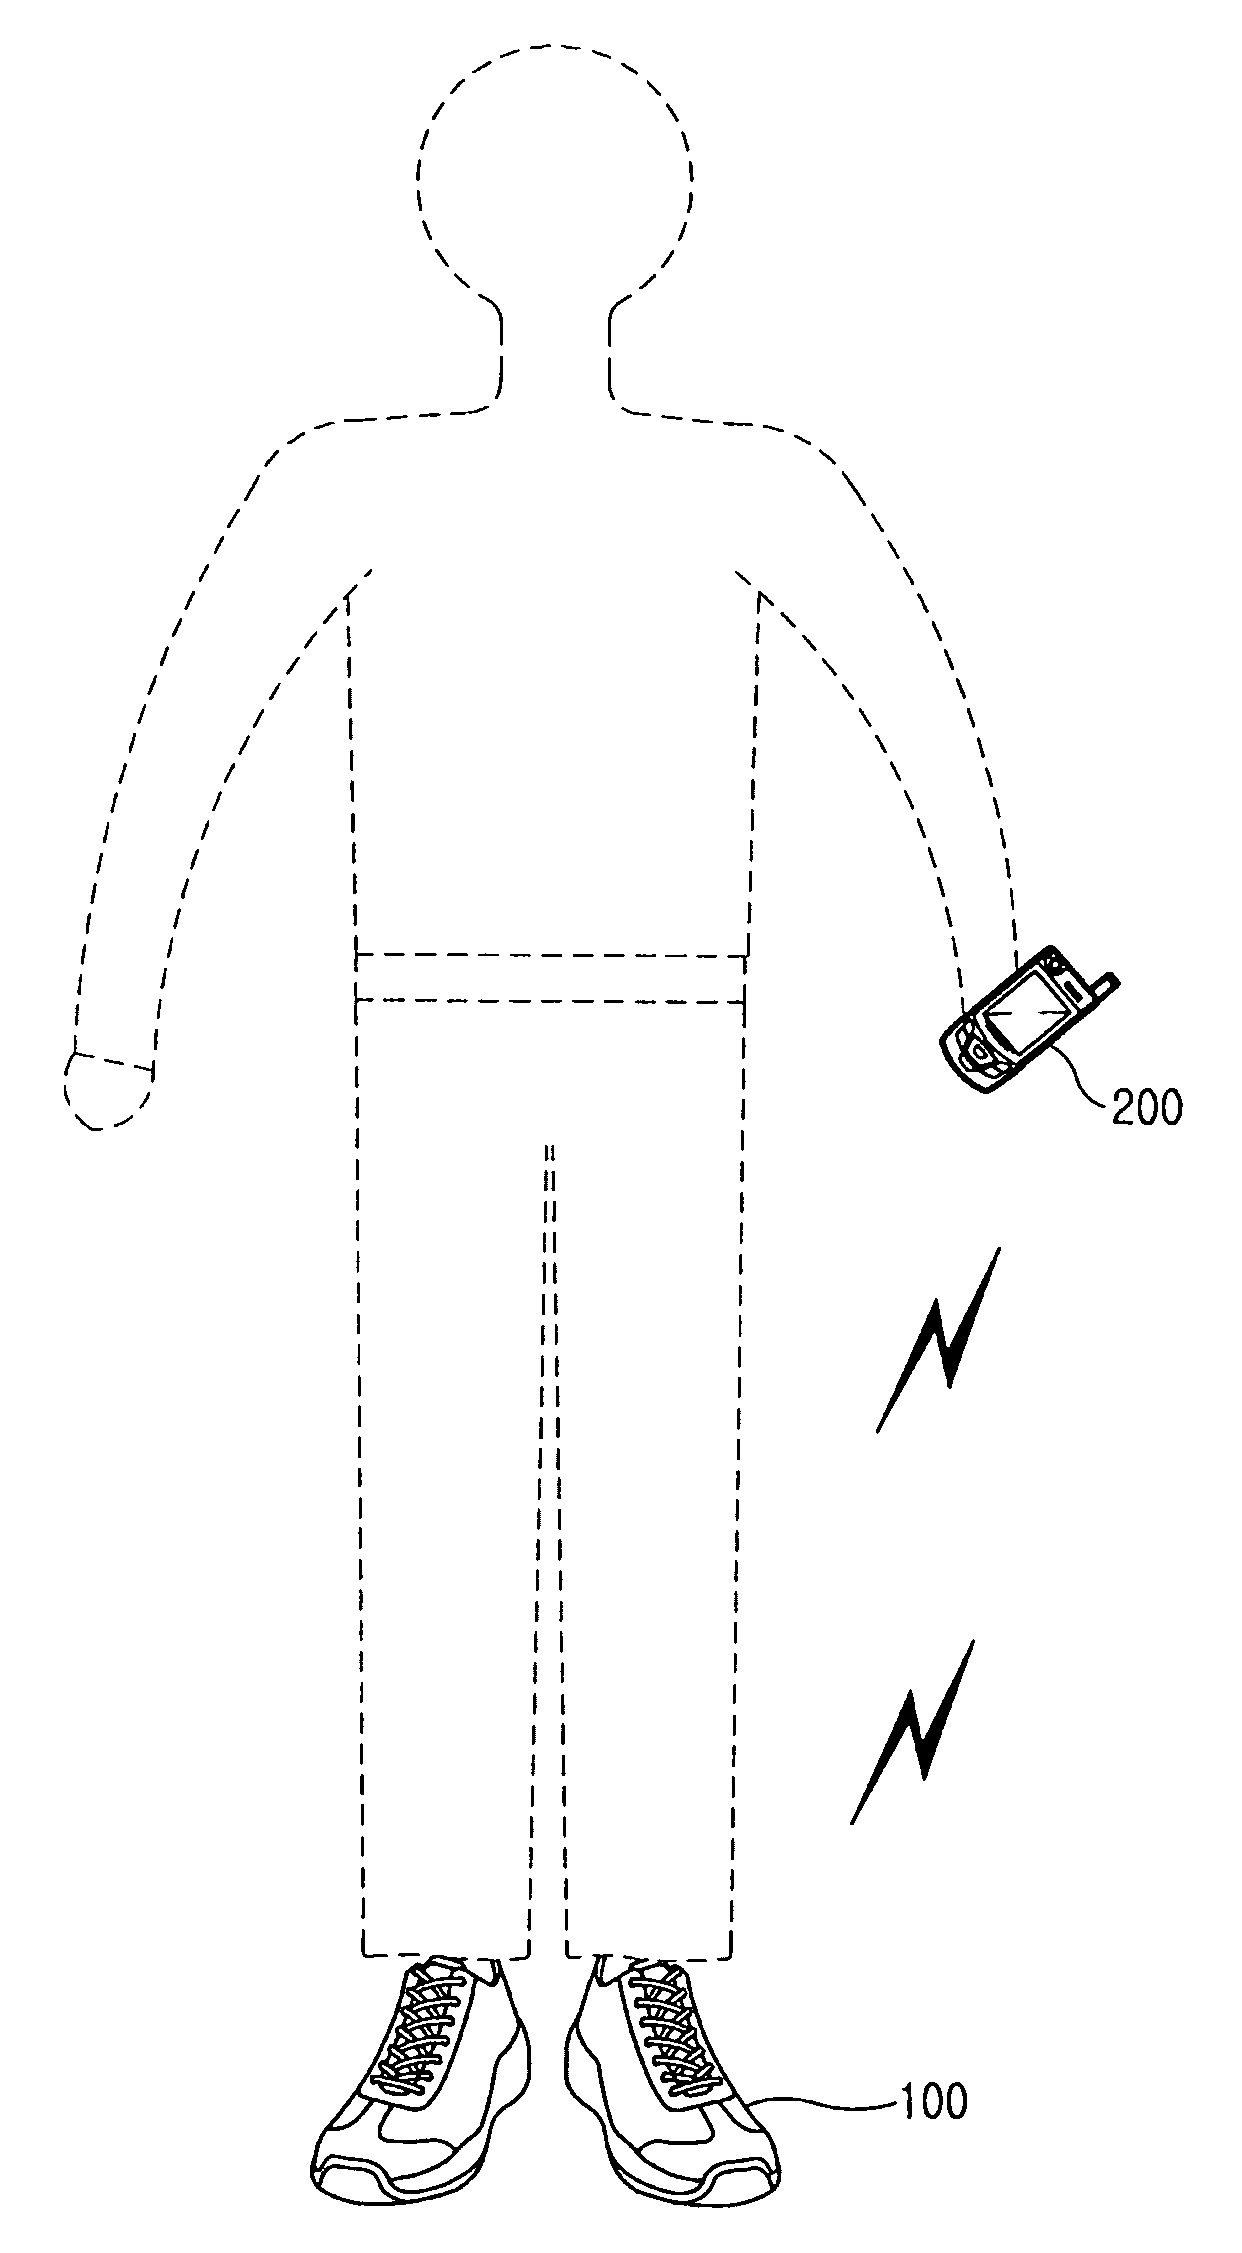 Exercise management function providing system and method